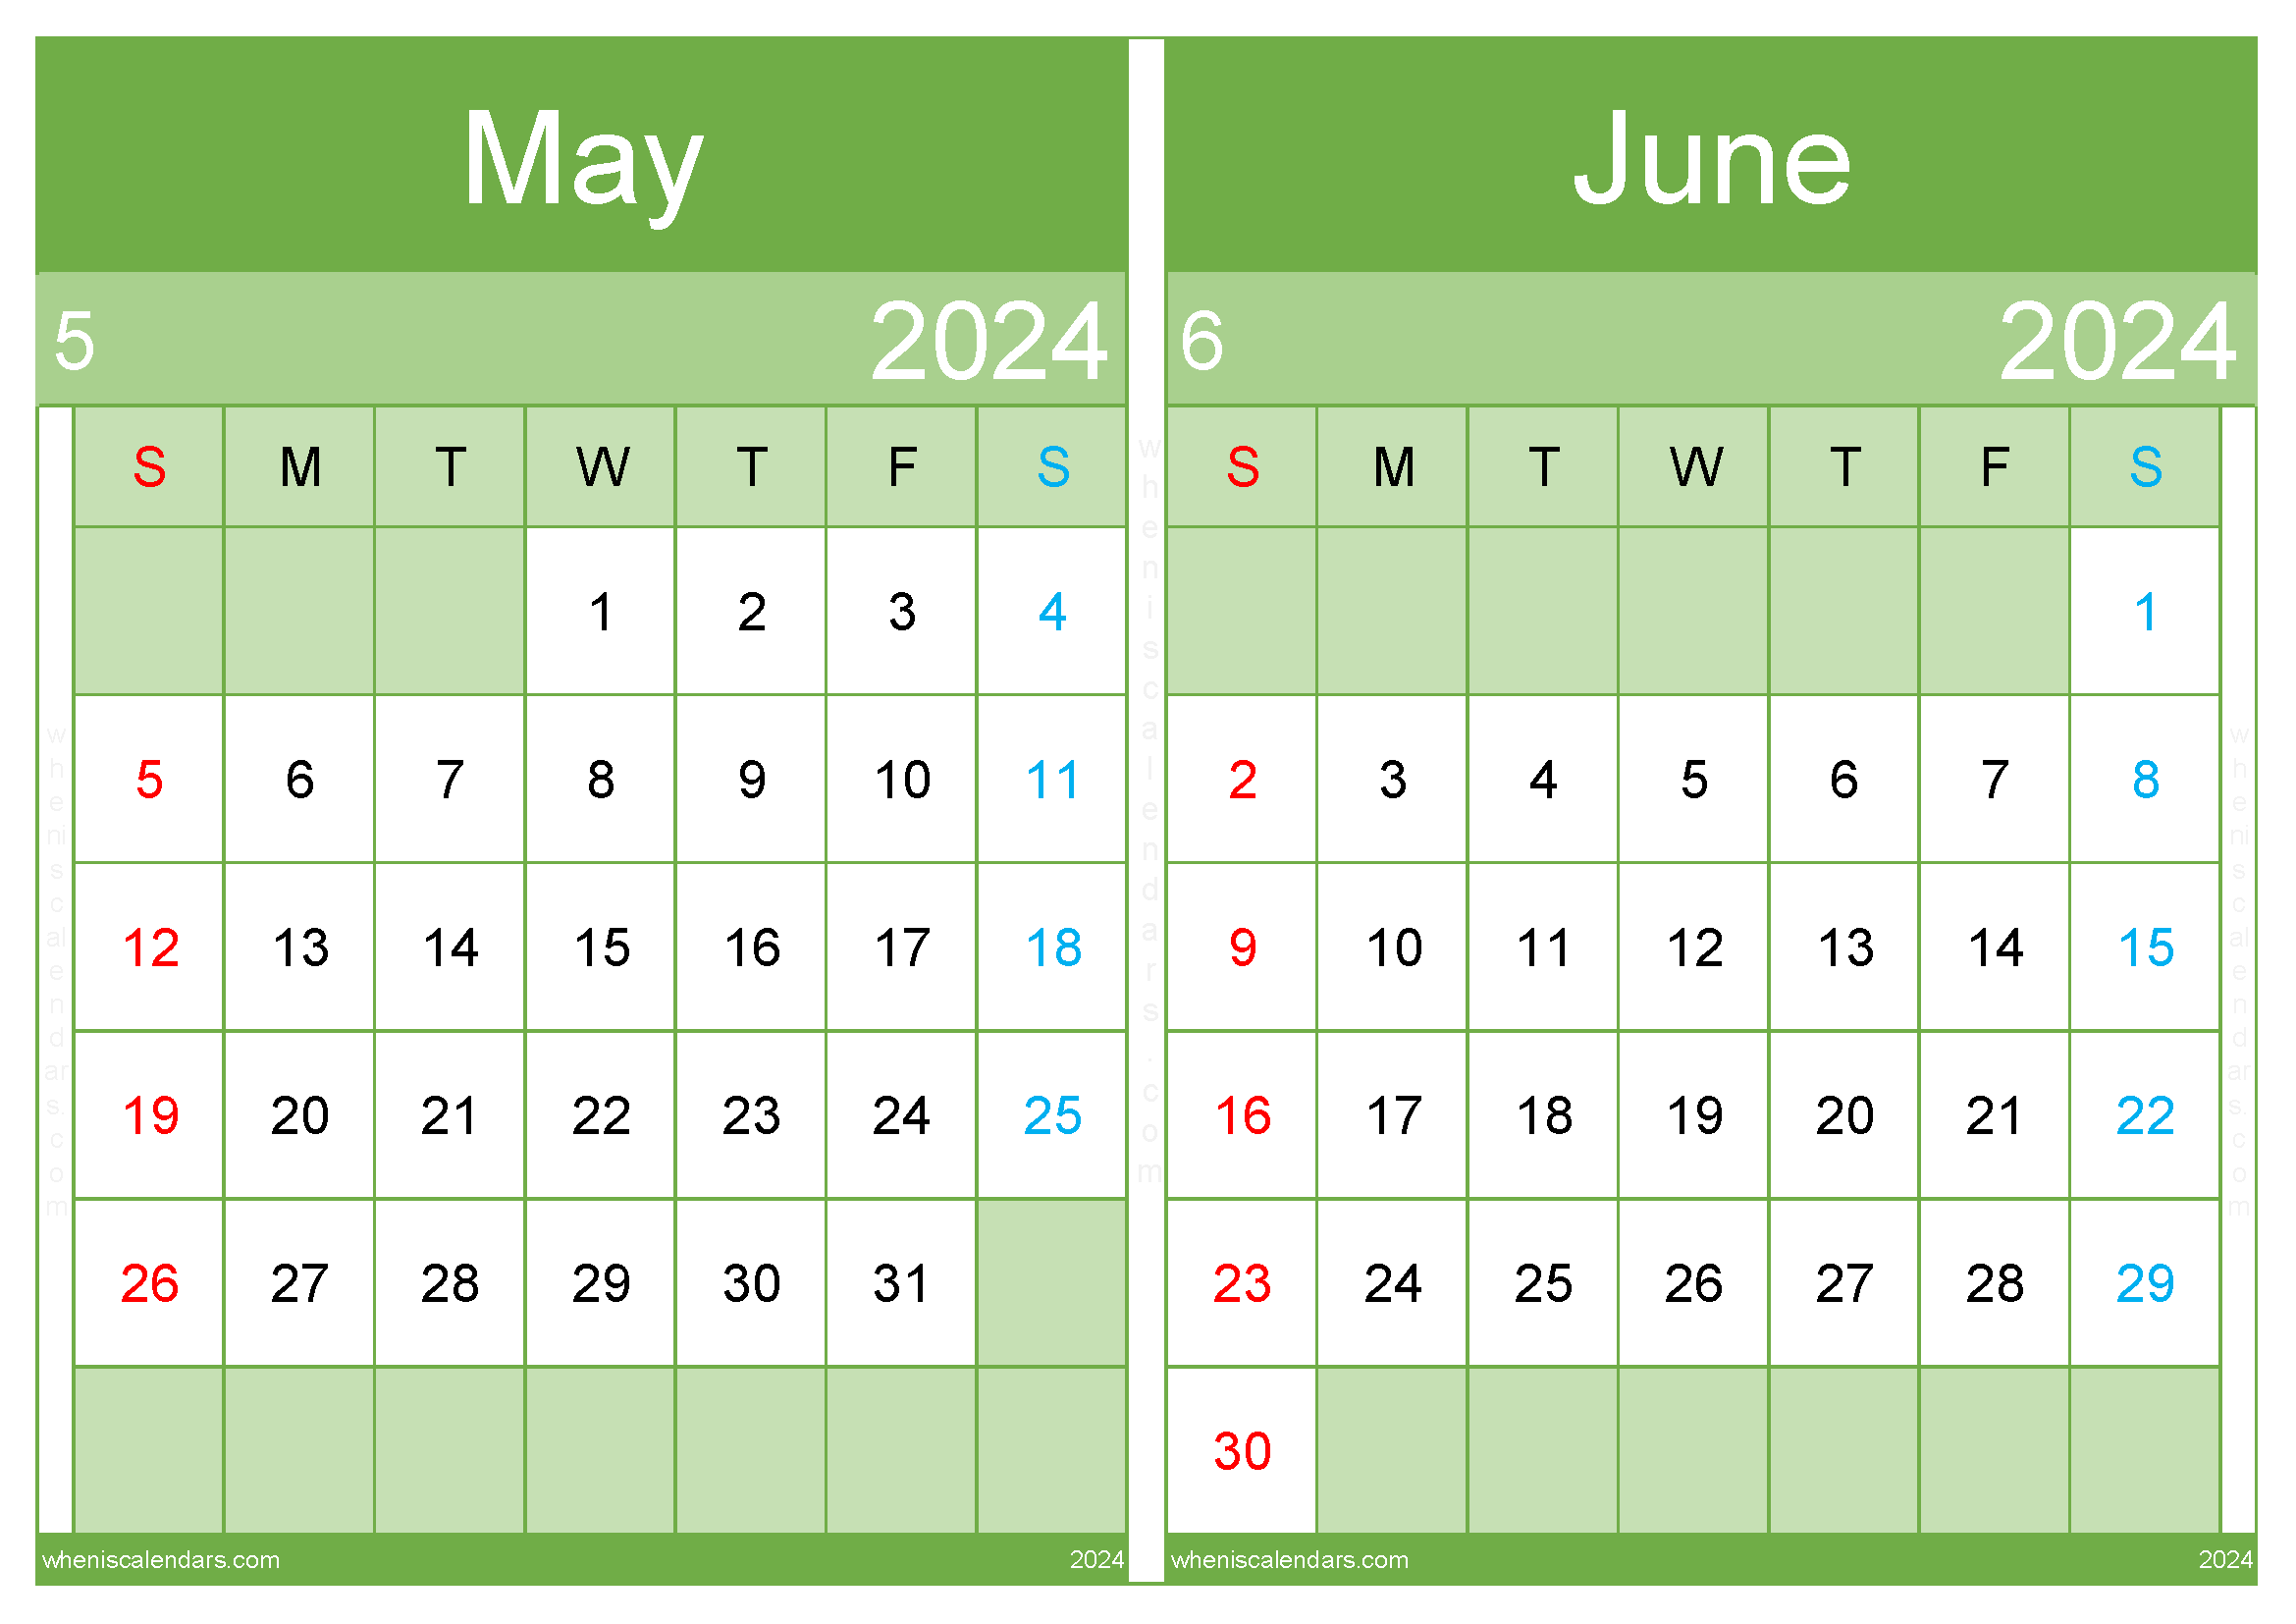 May and June Calendar 2024 Two-Month